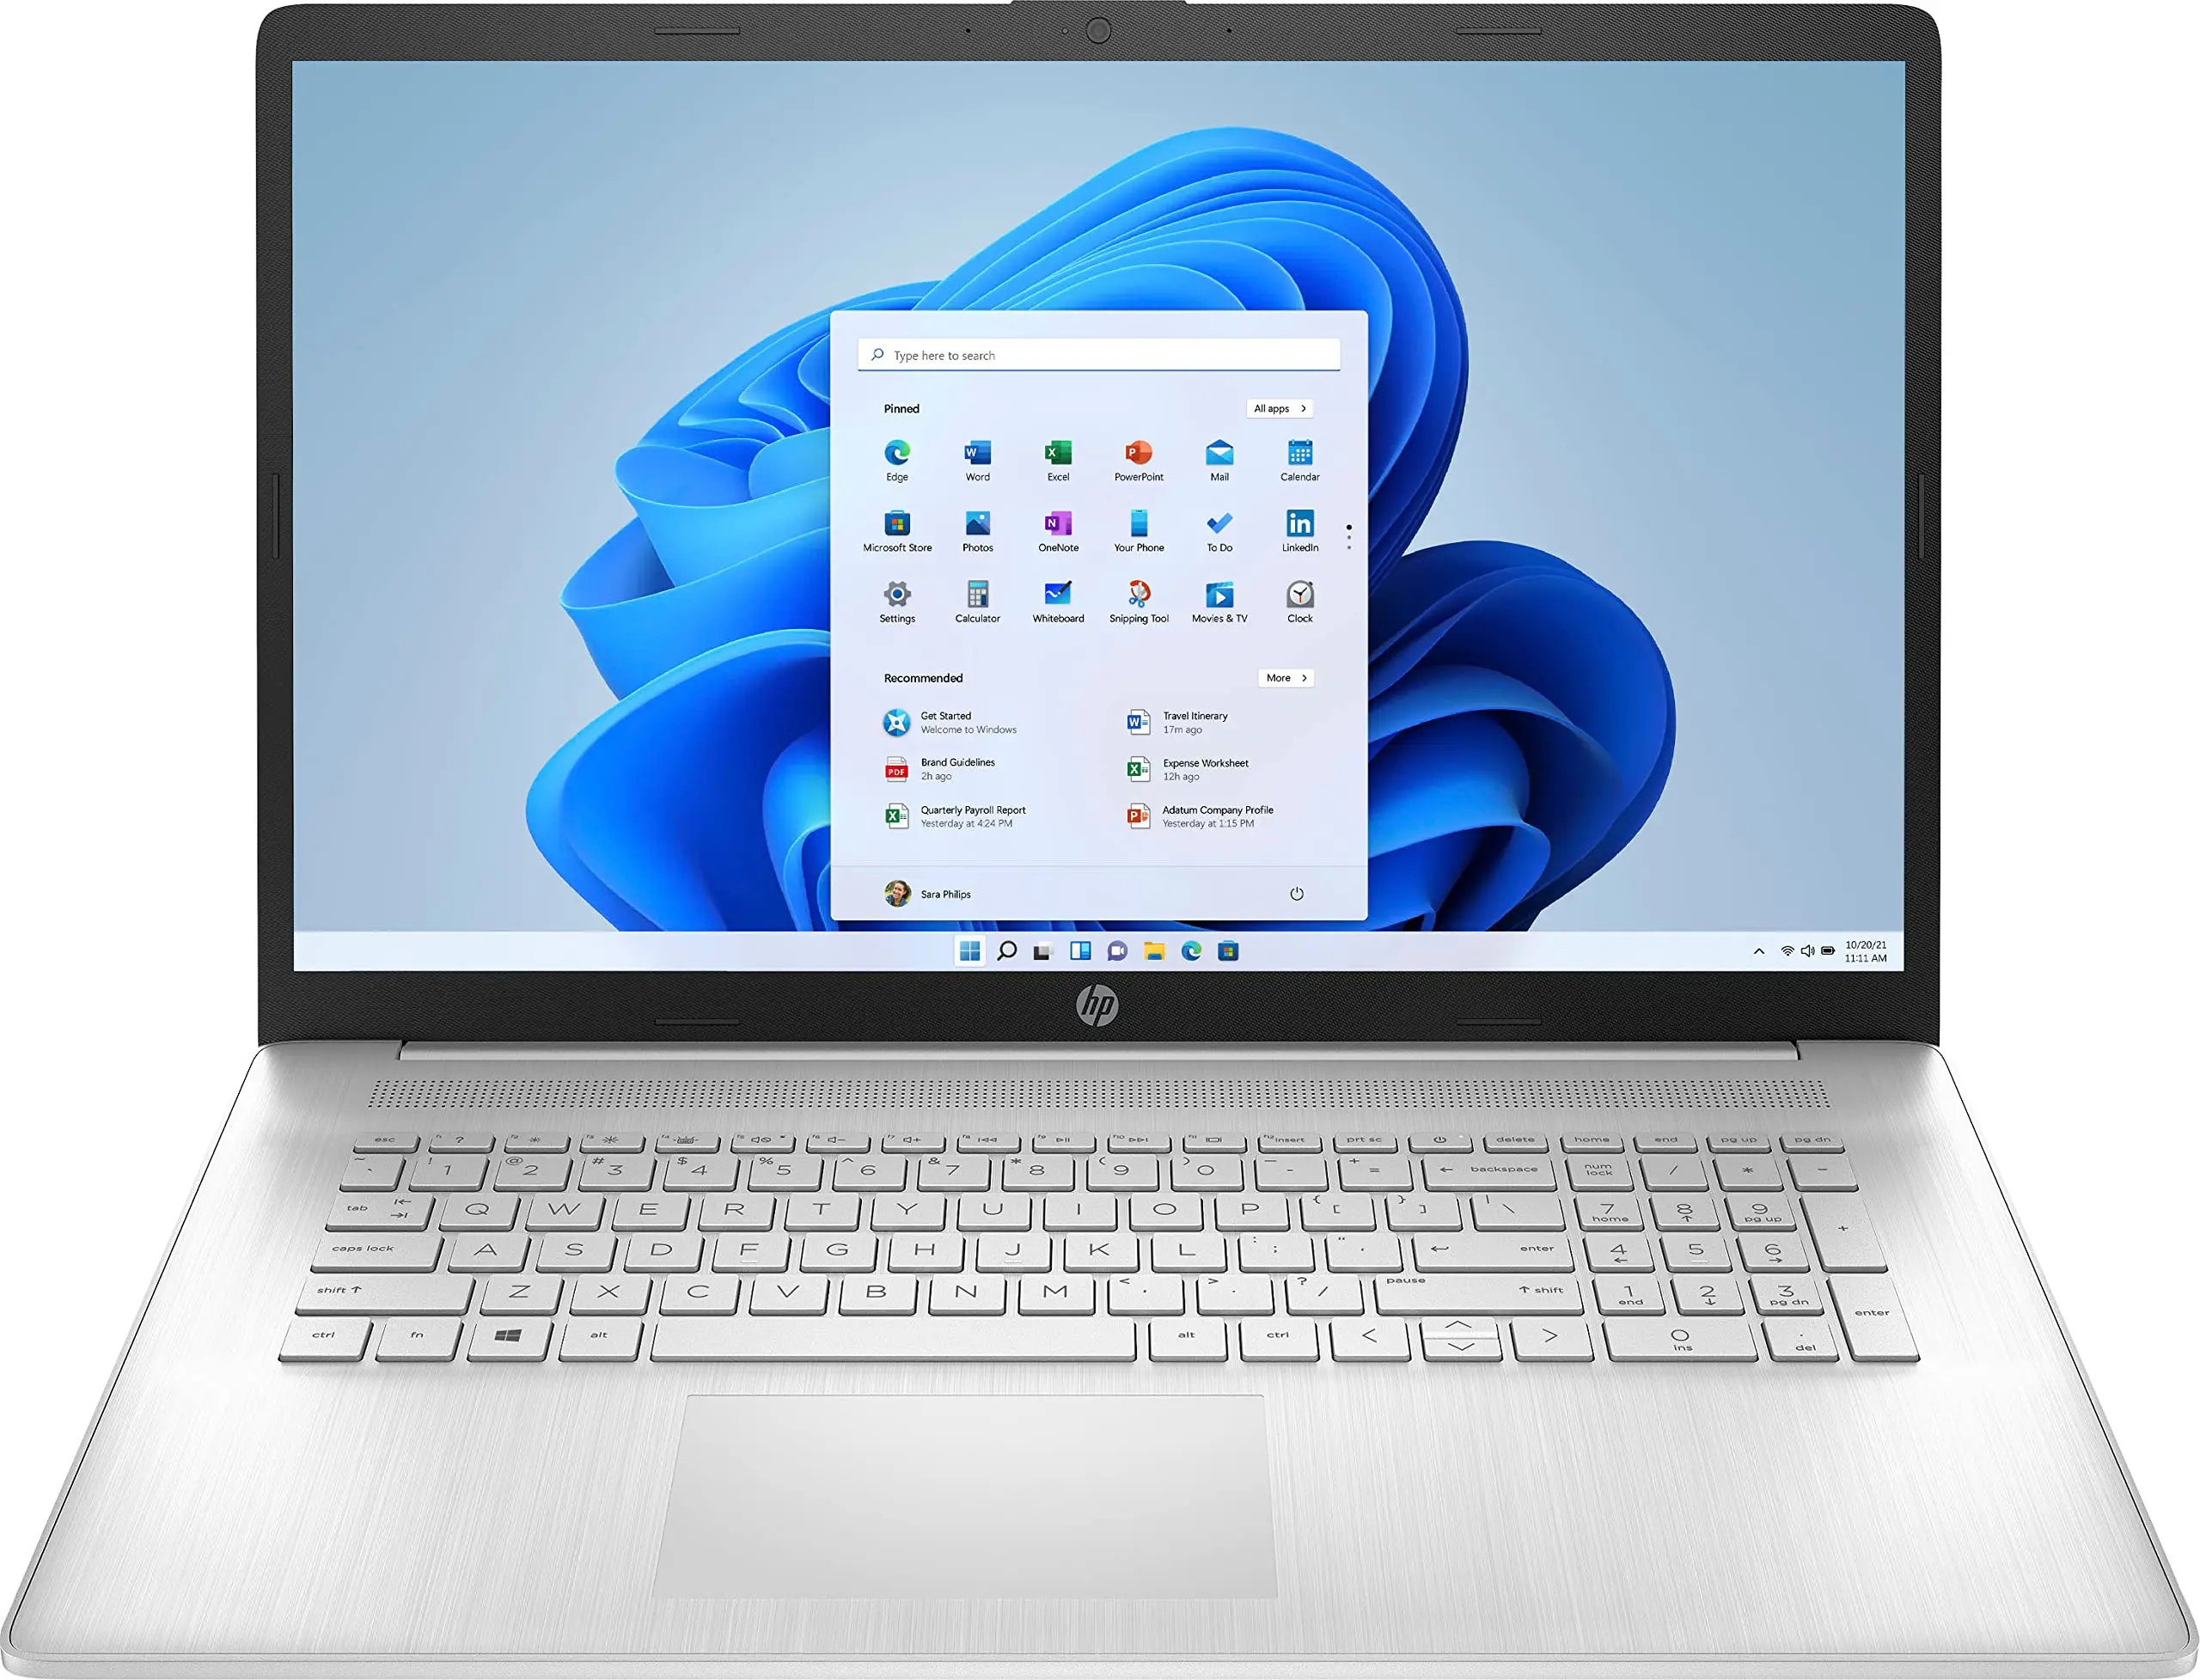 hewlett packard laptop touch screen not working - How do I enable the touchscreen on my HP laptop Windows 11